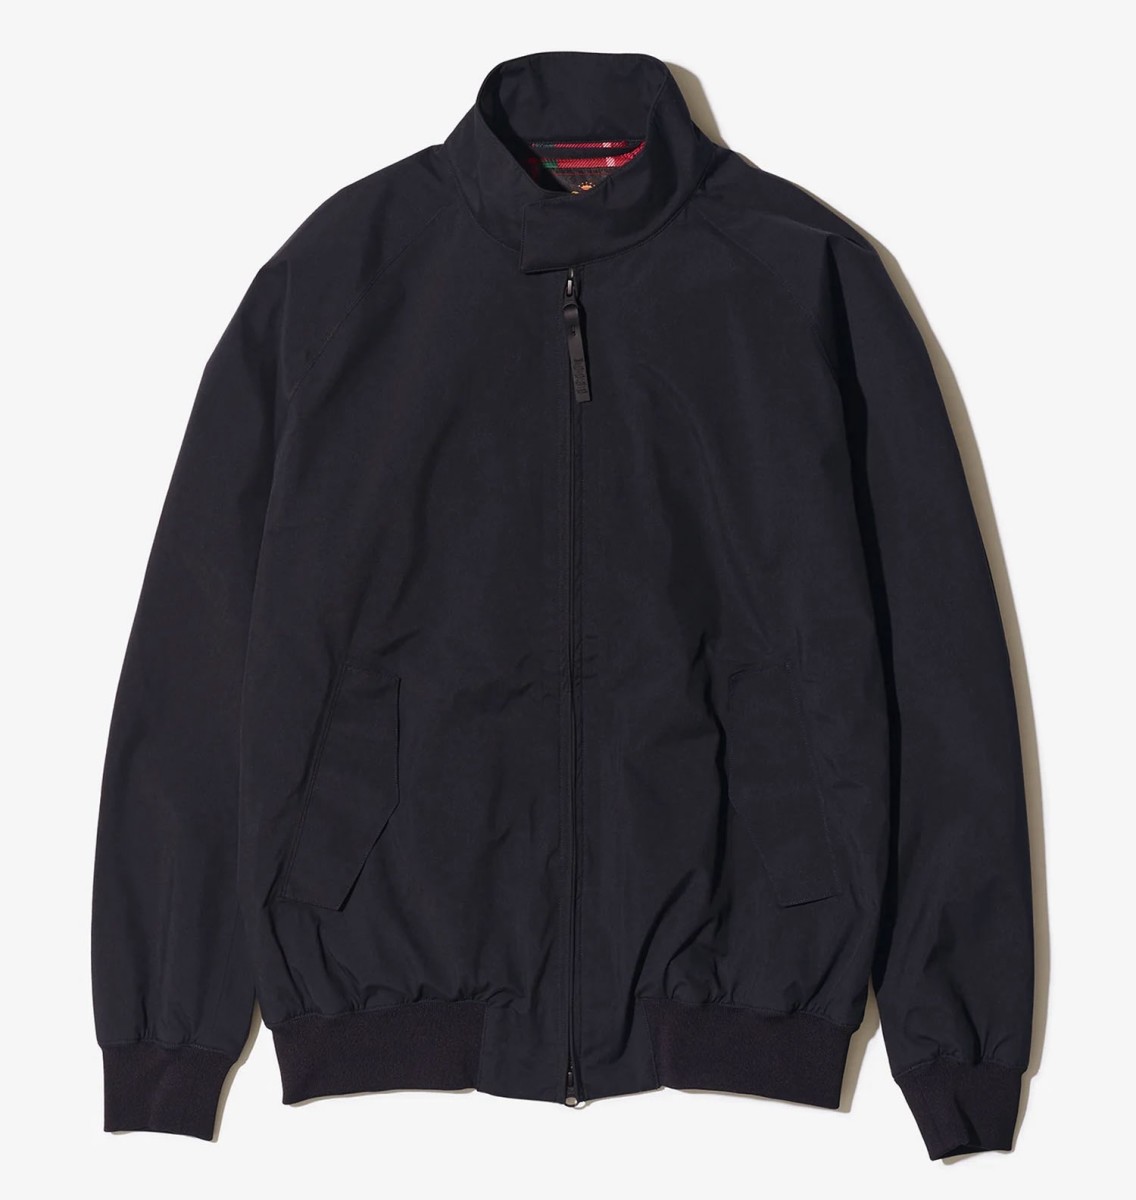 Goldwin brings its technical outerwear expertise to a trio of Baracuta ...